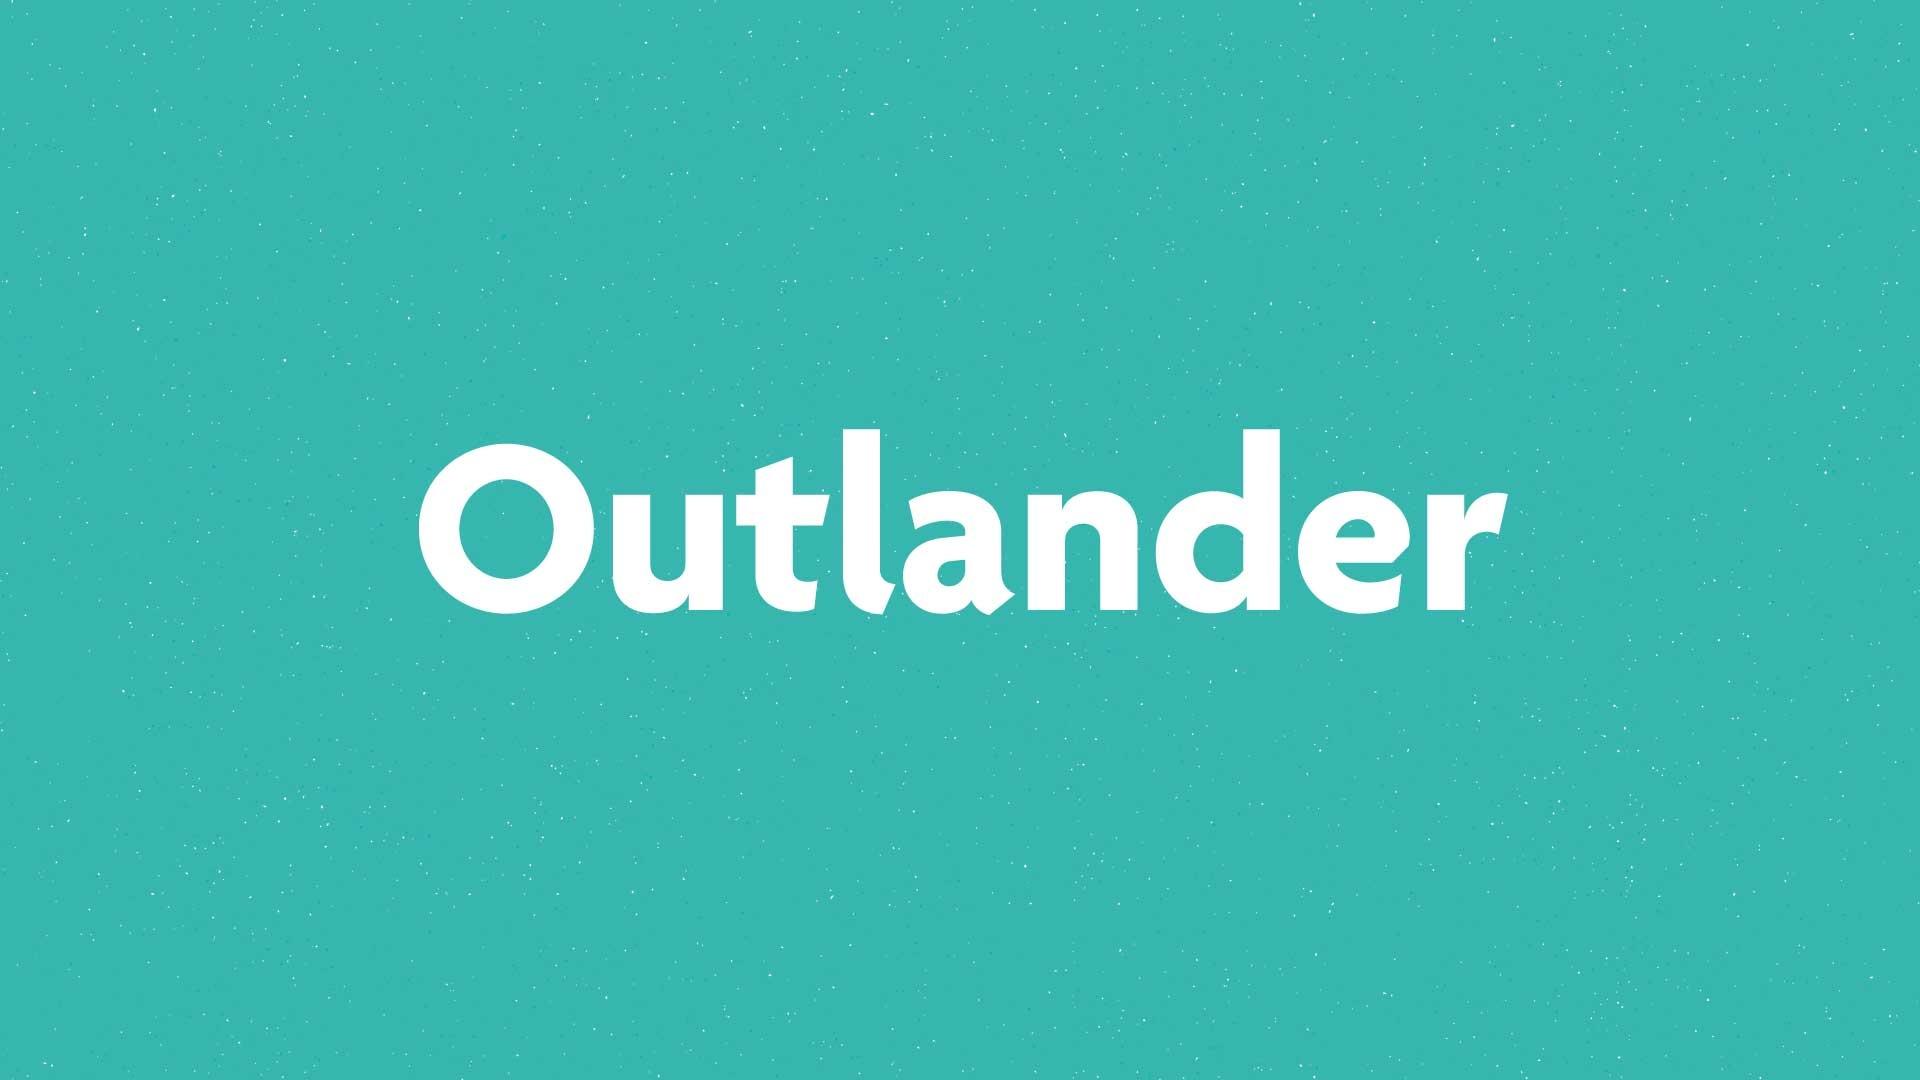 Outlander book submission card on a green background.